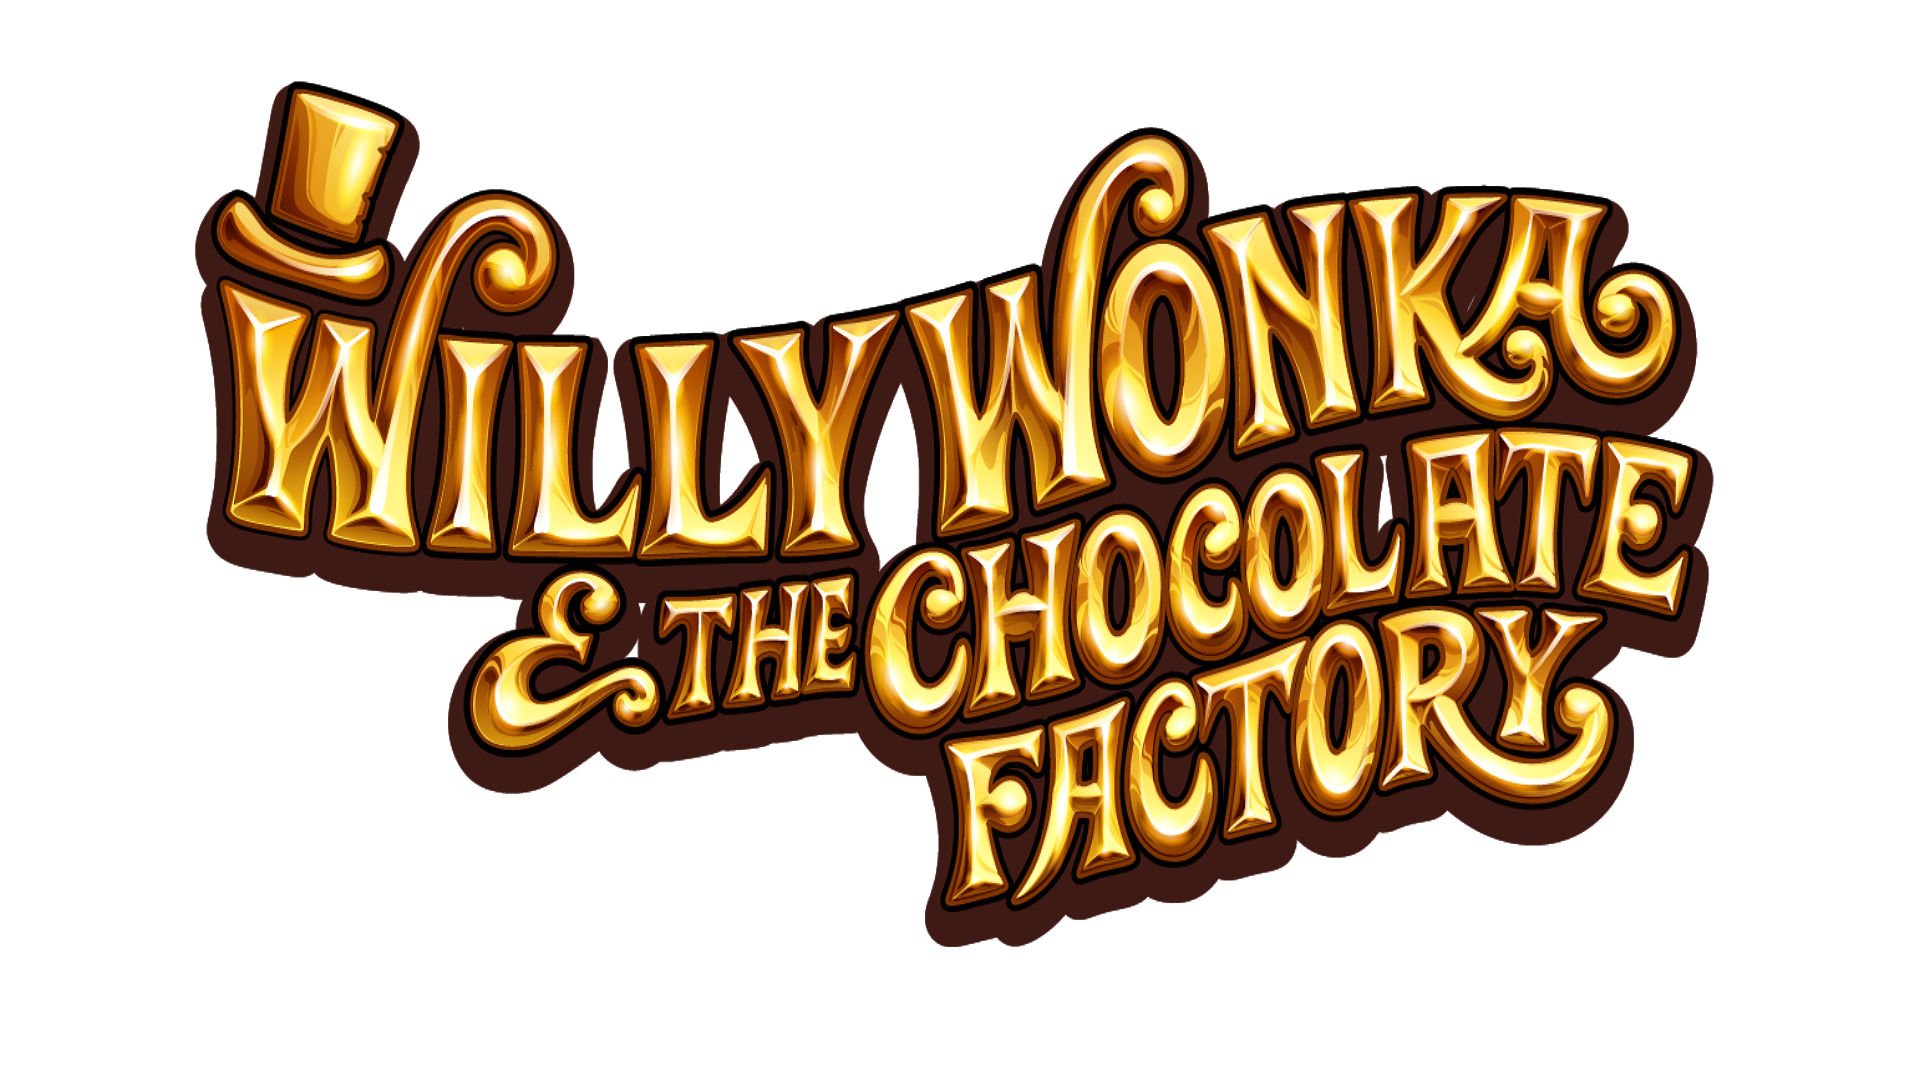 Willy Wonka Chocolate Factory Charlie Adventure Family